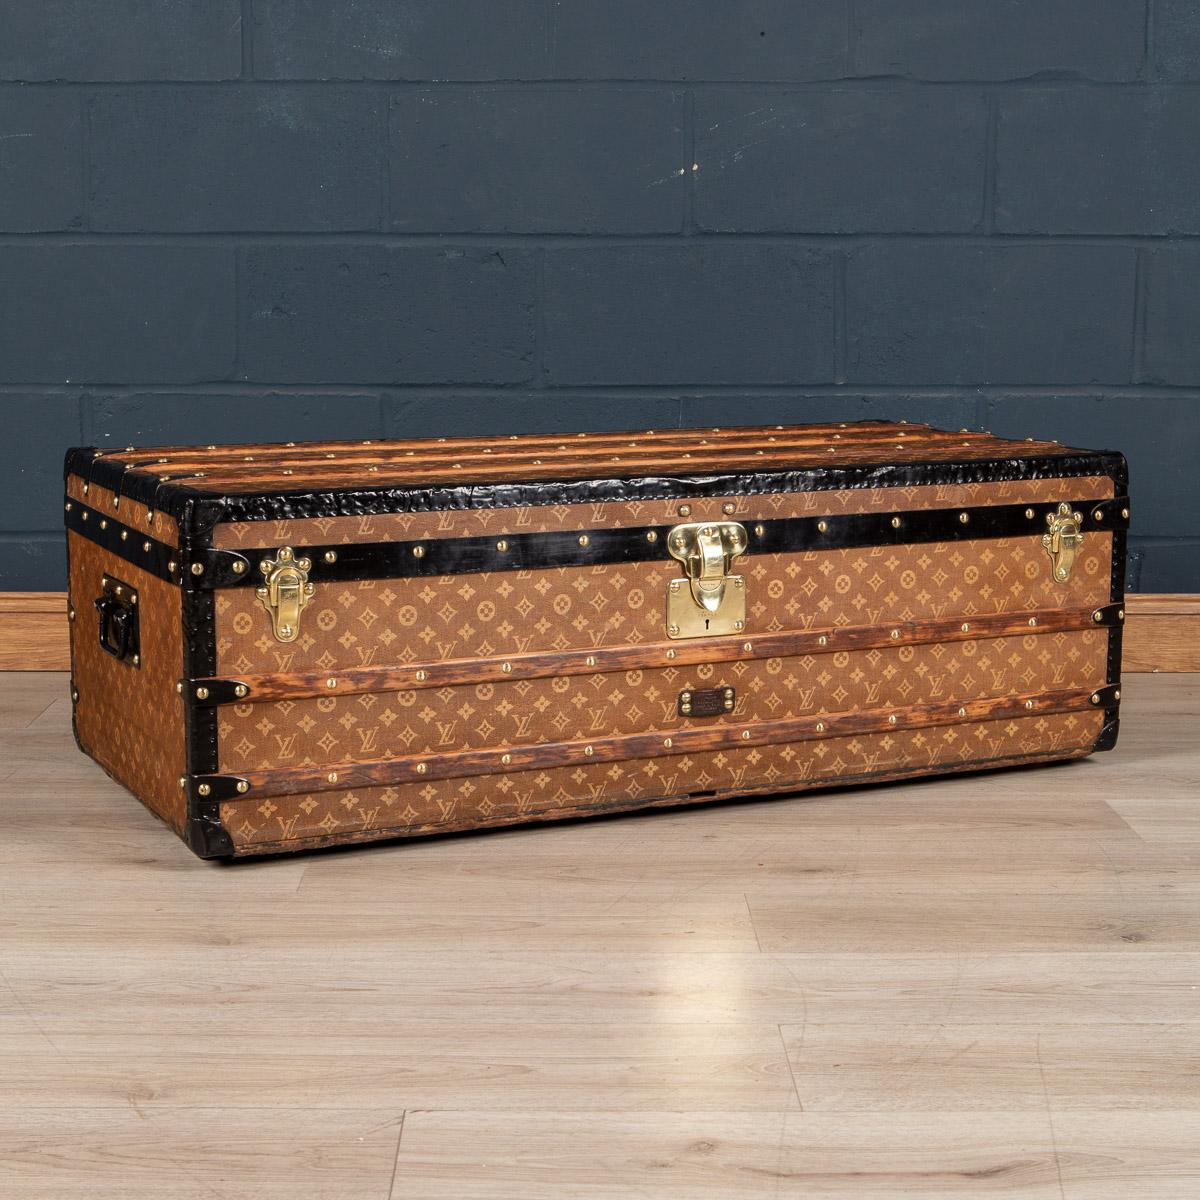 A very rare example of an oversized Louis Vuitton trunk in woven monogrammed canvas. What distinguishes this particular trunk from others is its unusual size. With a height of 40cm and a width of 120cm is was almost certainly a custom order and has